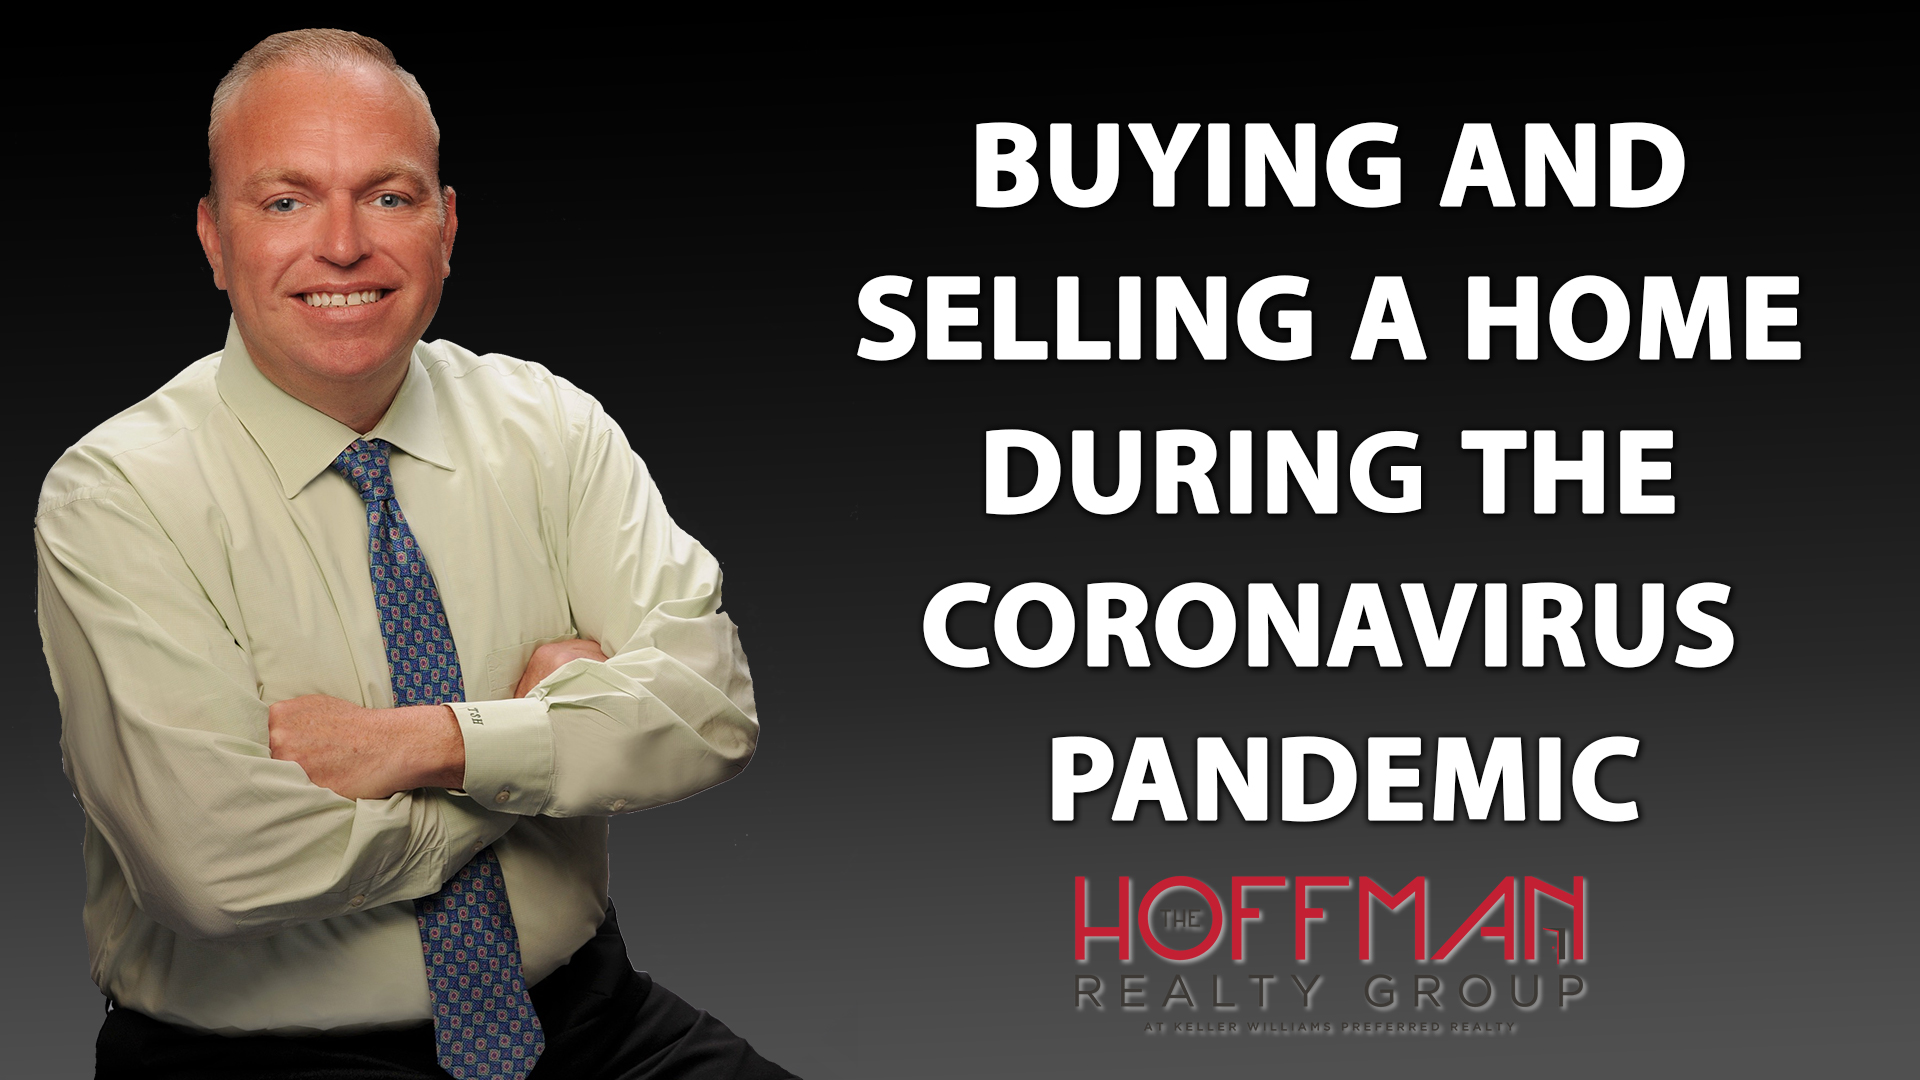 How to Buy and Sell a Home During the Coronavirus Pandemic